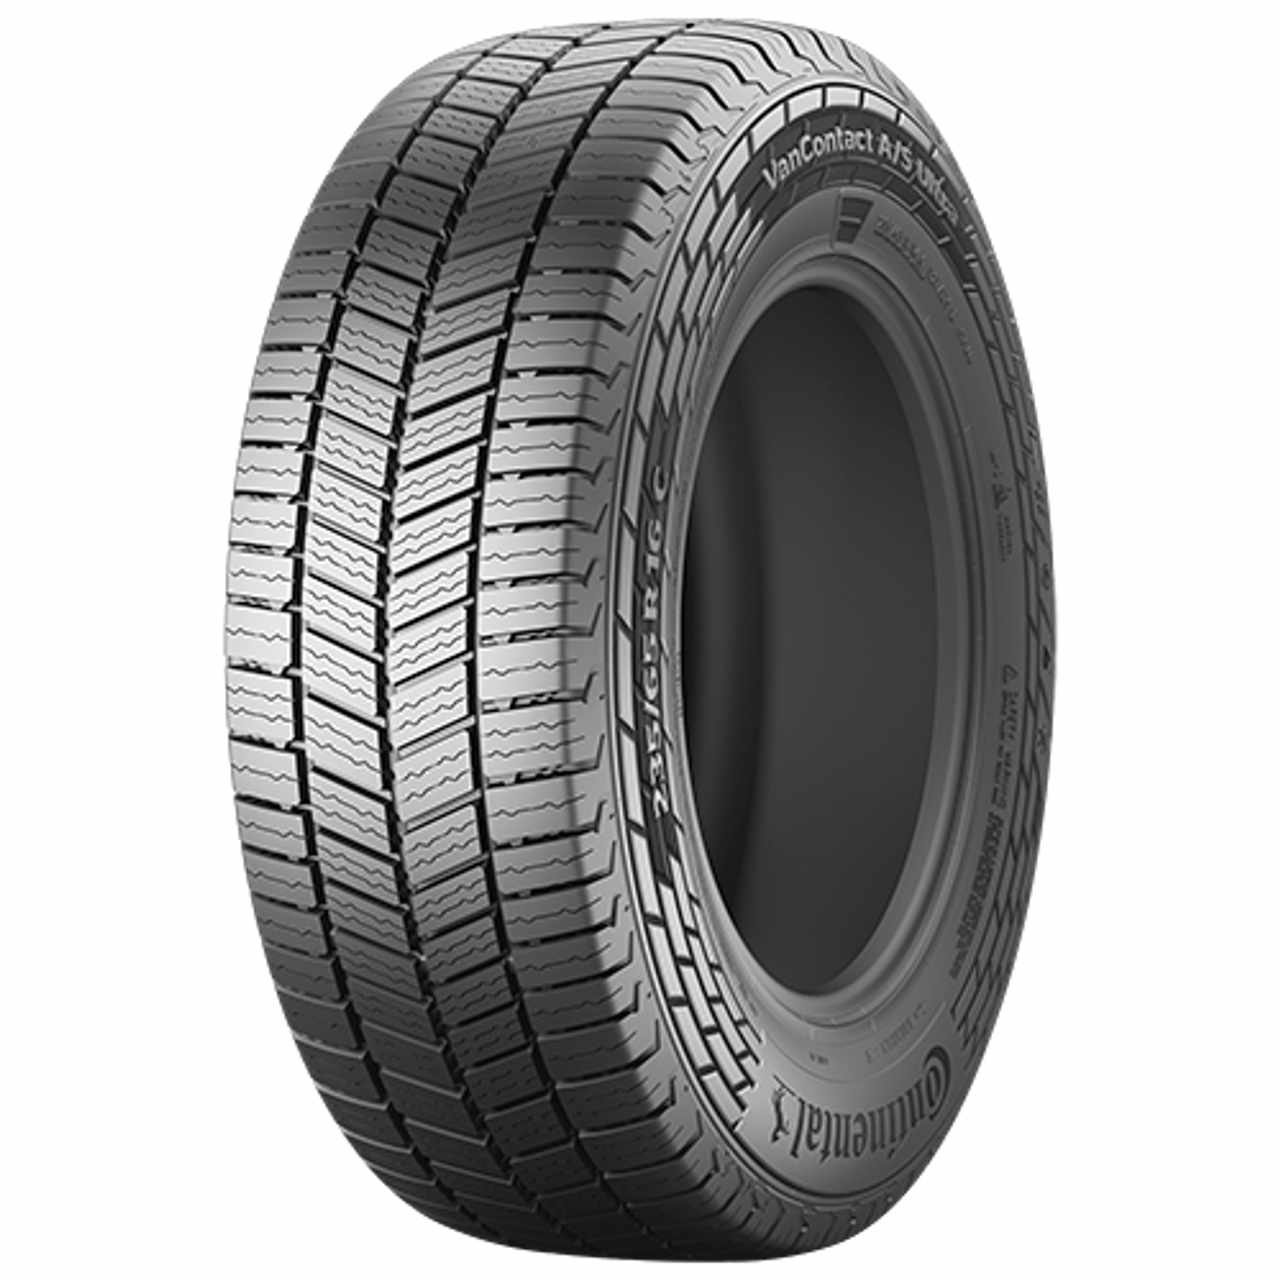 CONTINENTAL VANCONTACT A/S ULTRA 195/60R16C 99H BSW